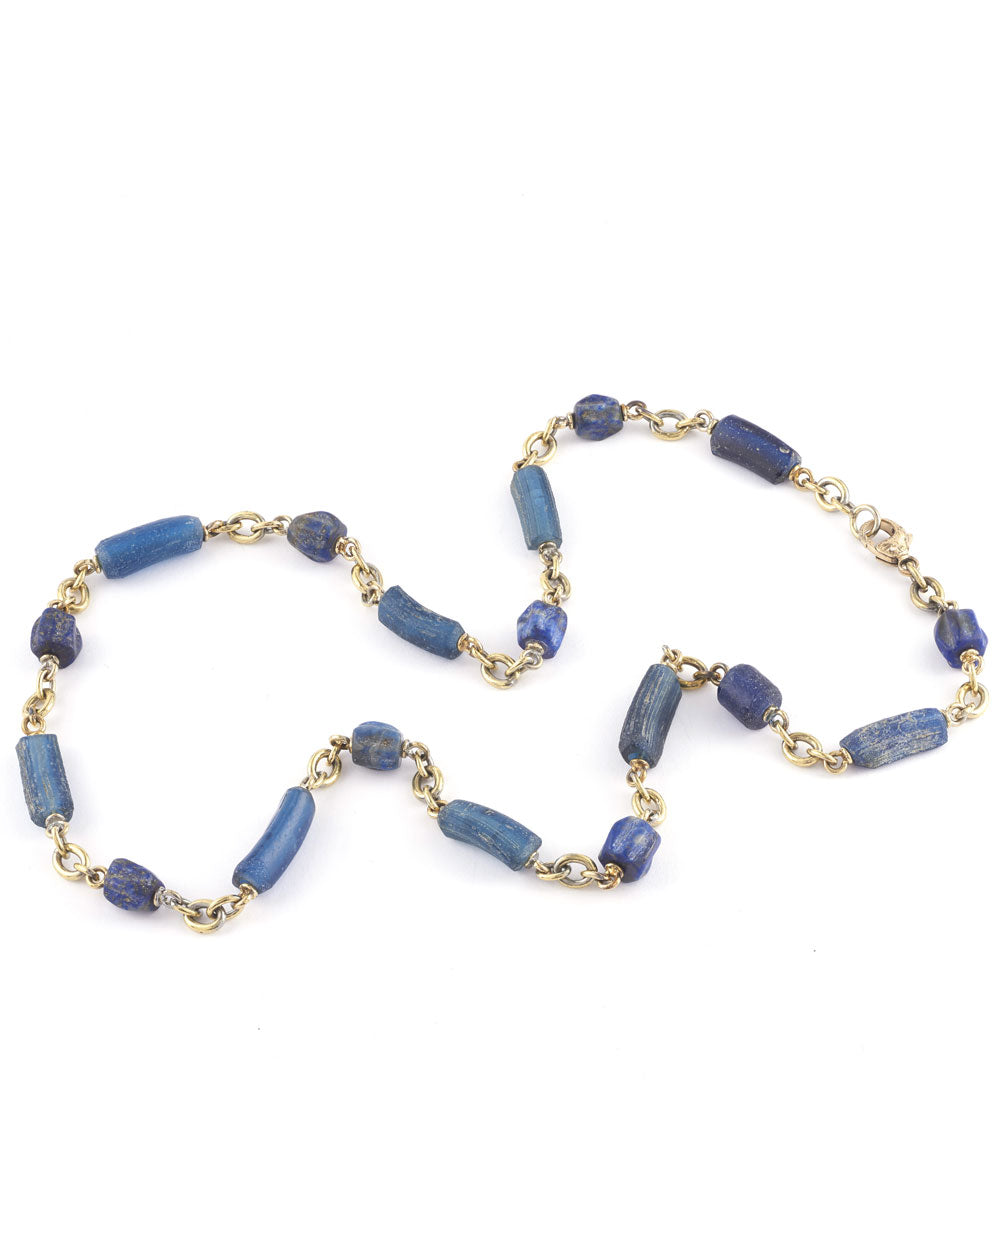 Hand Blown Glass and Lapis Bead Necklace